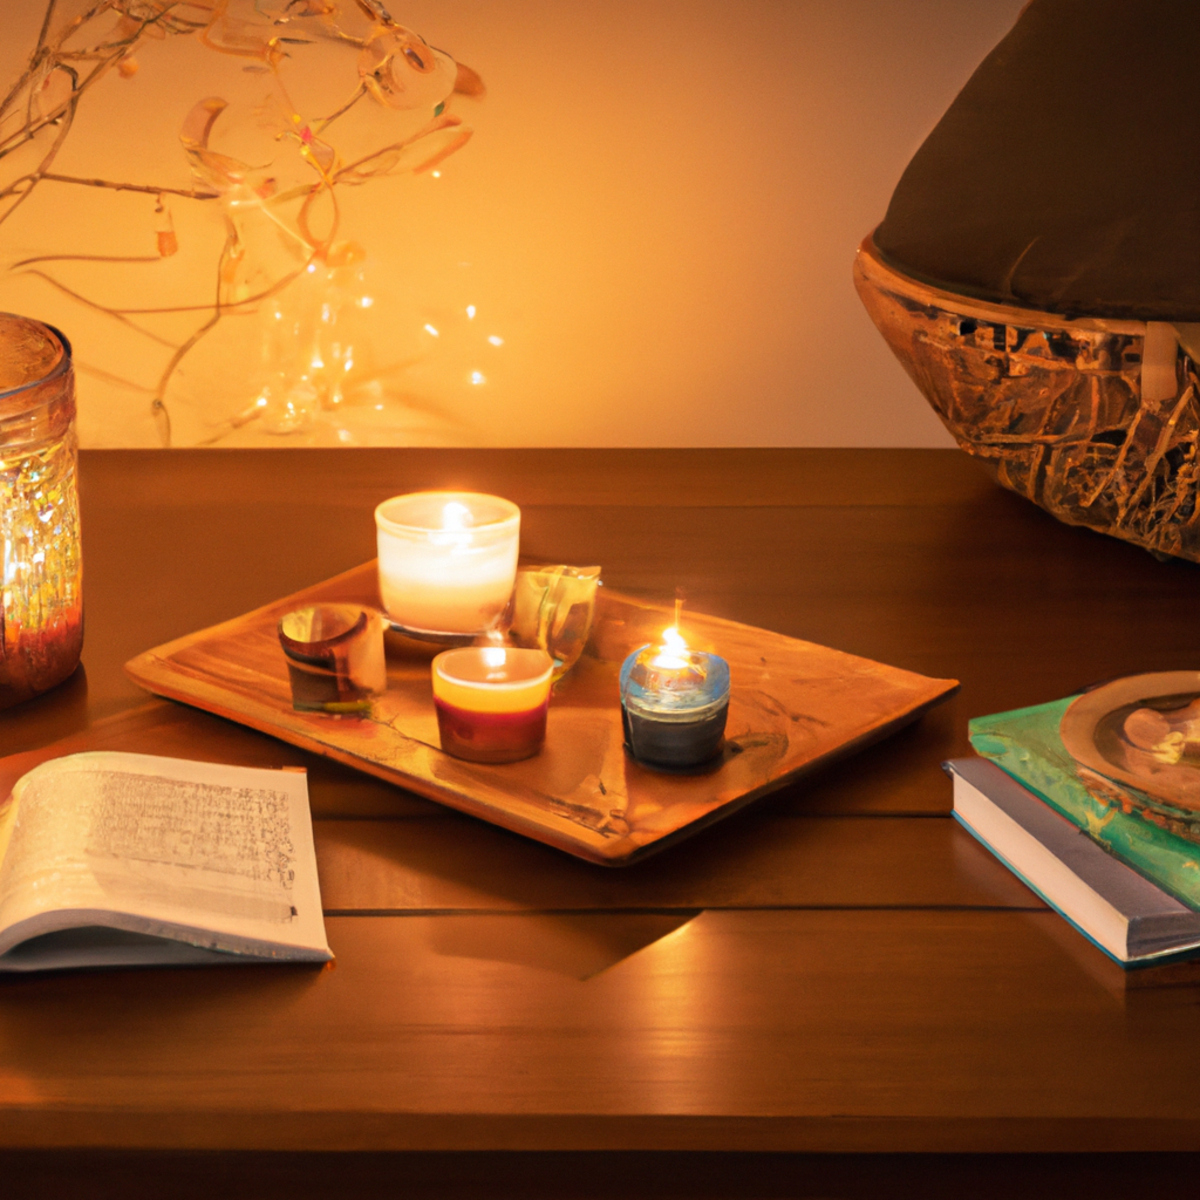 Cozy living room with candle, books, blanket, tea, promoting relaxation and mindfulness -Self-care tips